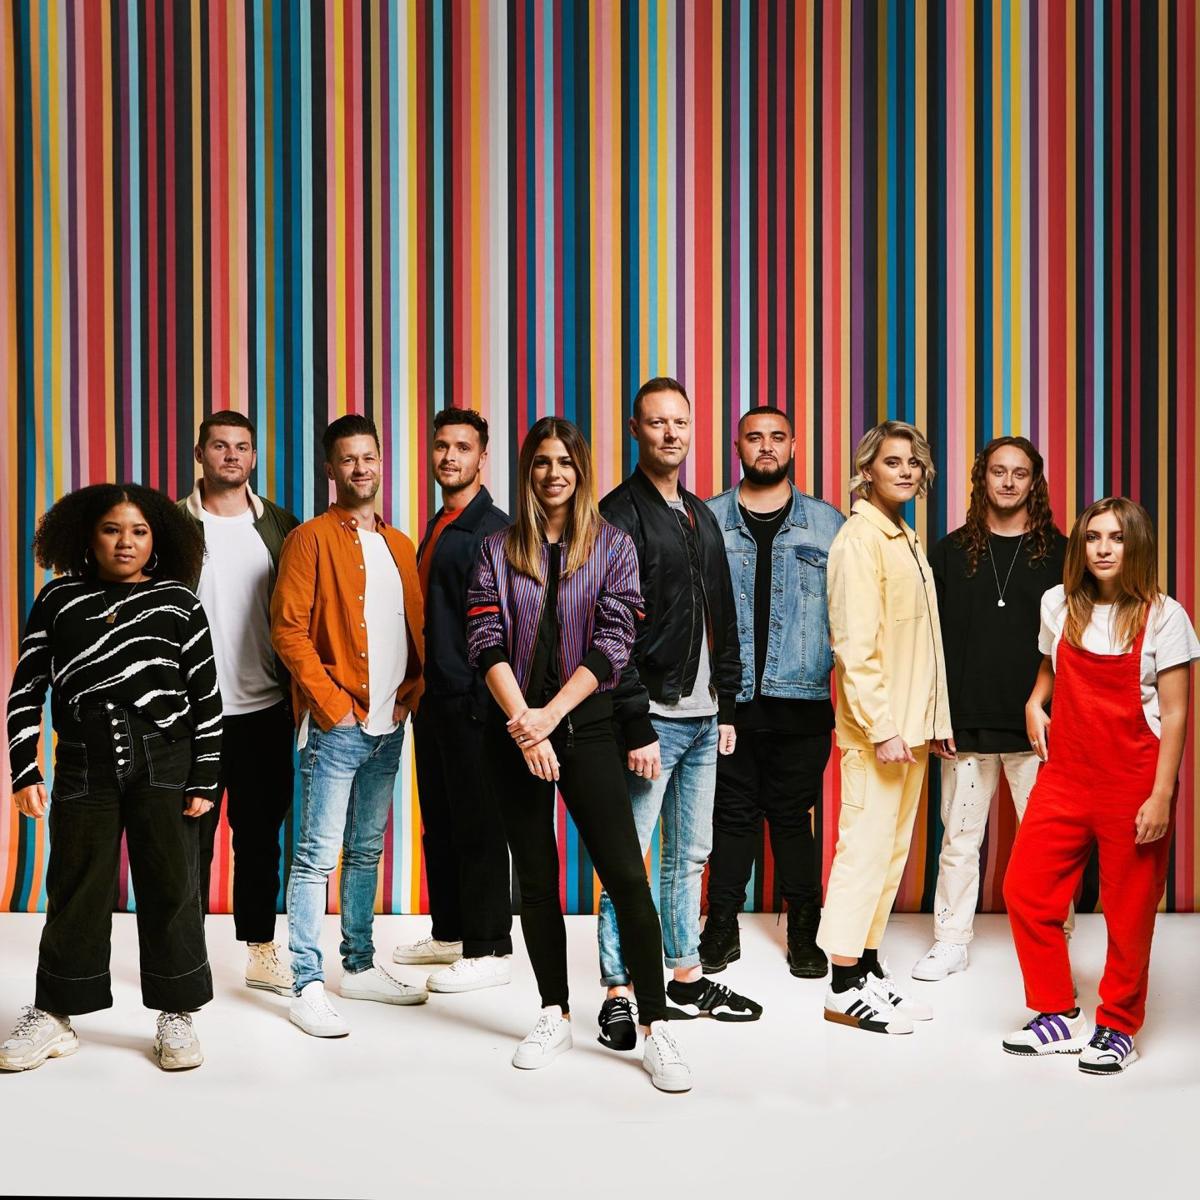 Hillsong United to play July show at Chesapeake Energy Arena